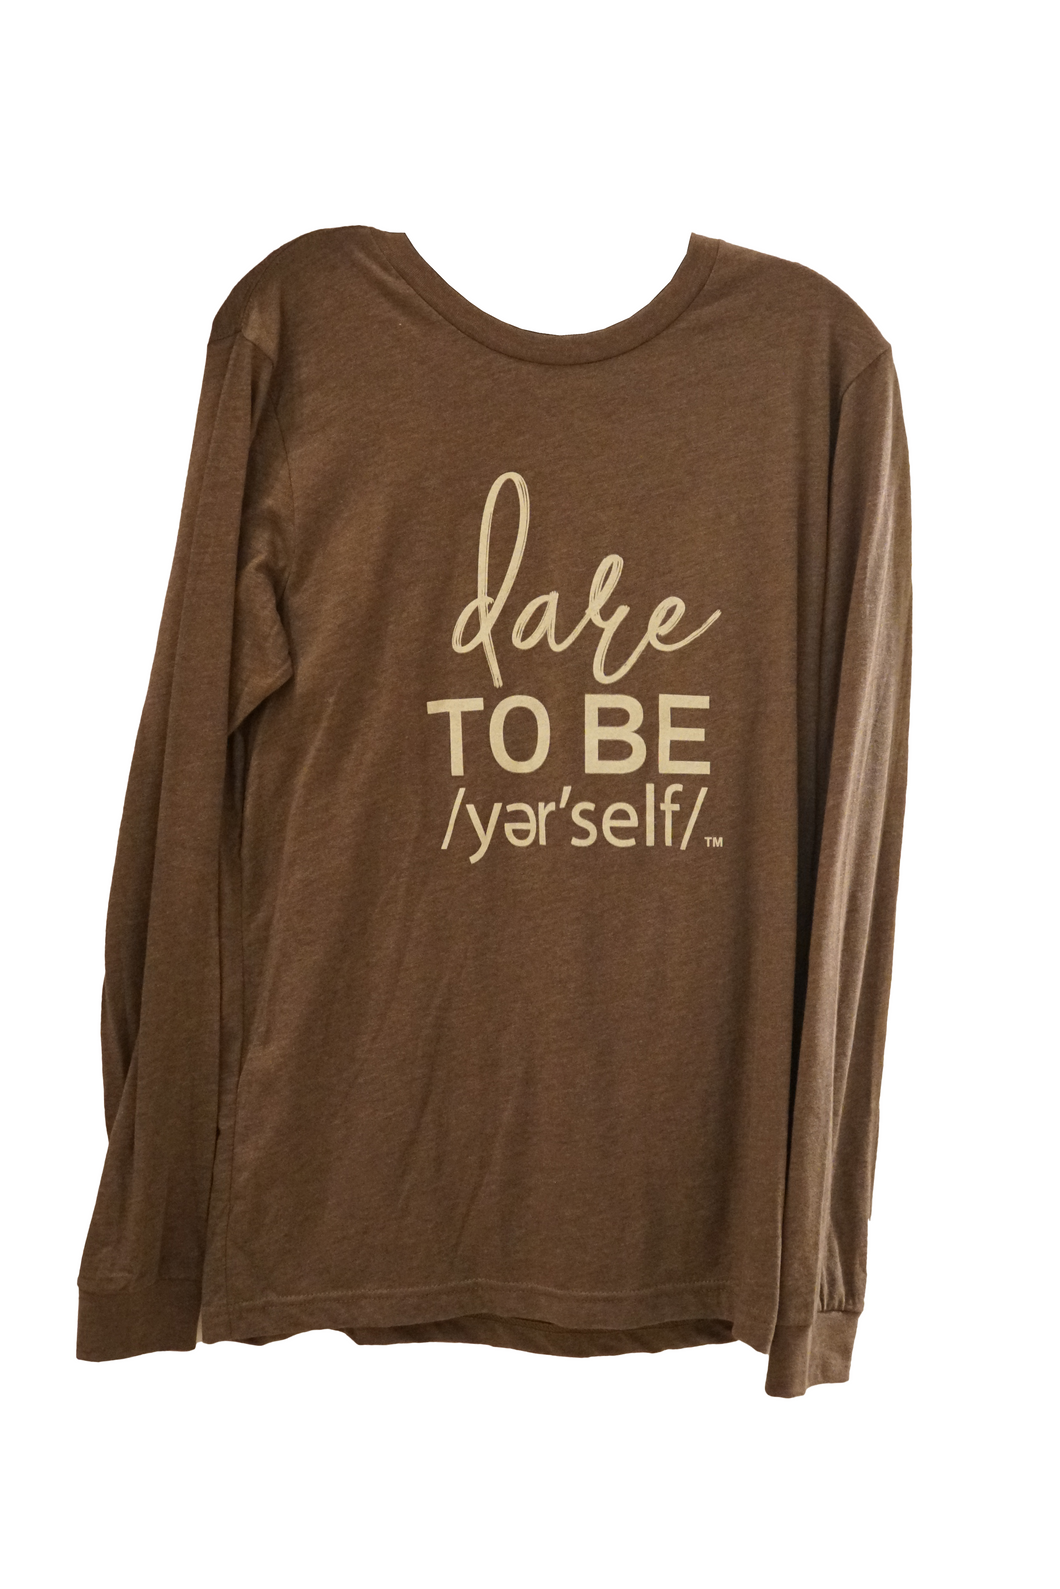 BROWN LONG SLEEVE TEE WITH DTB YER'SELF